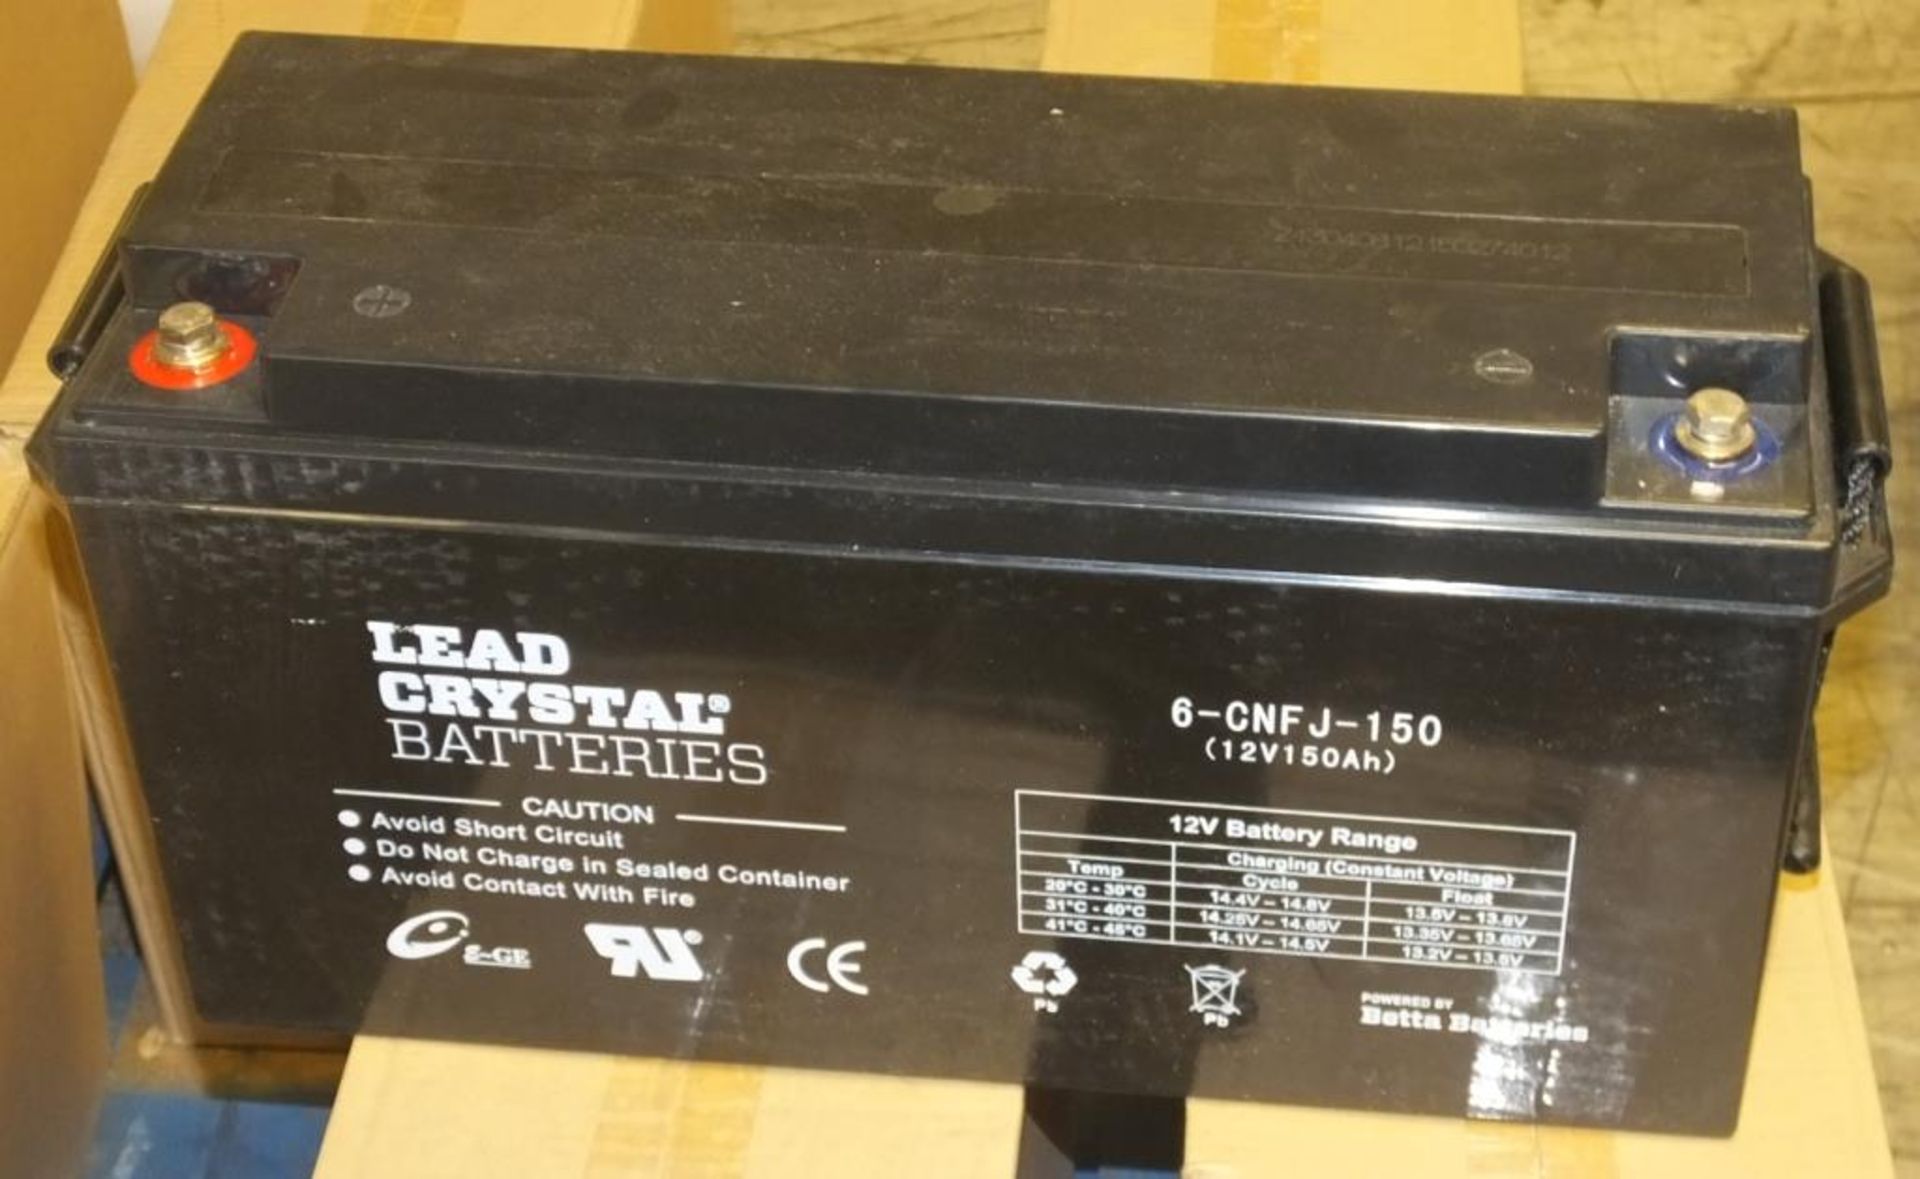 Betta Batteries Lead crystal battery 6-CNFT-150 - 12V 150Ah - 46kg (untested) - Image 2 of 4